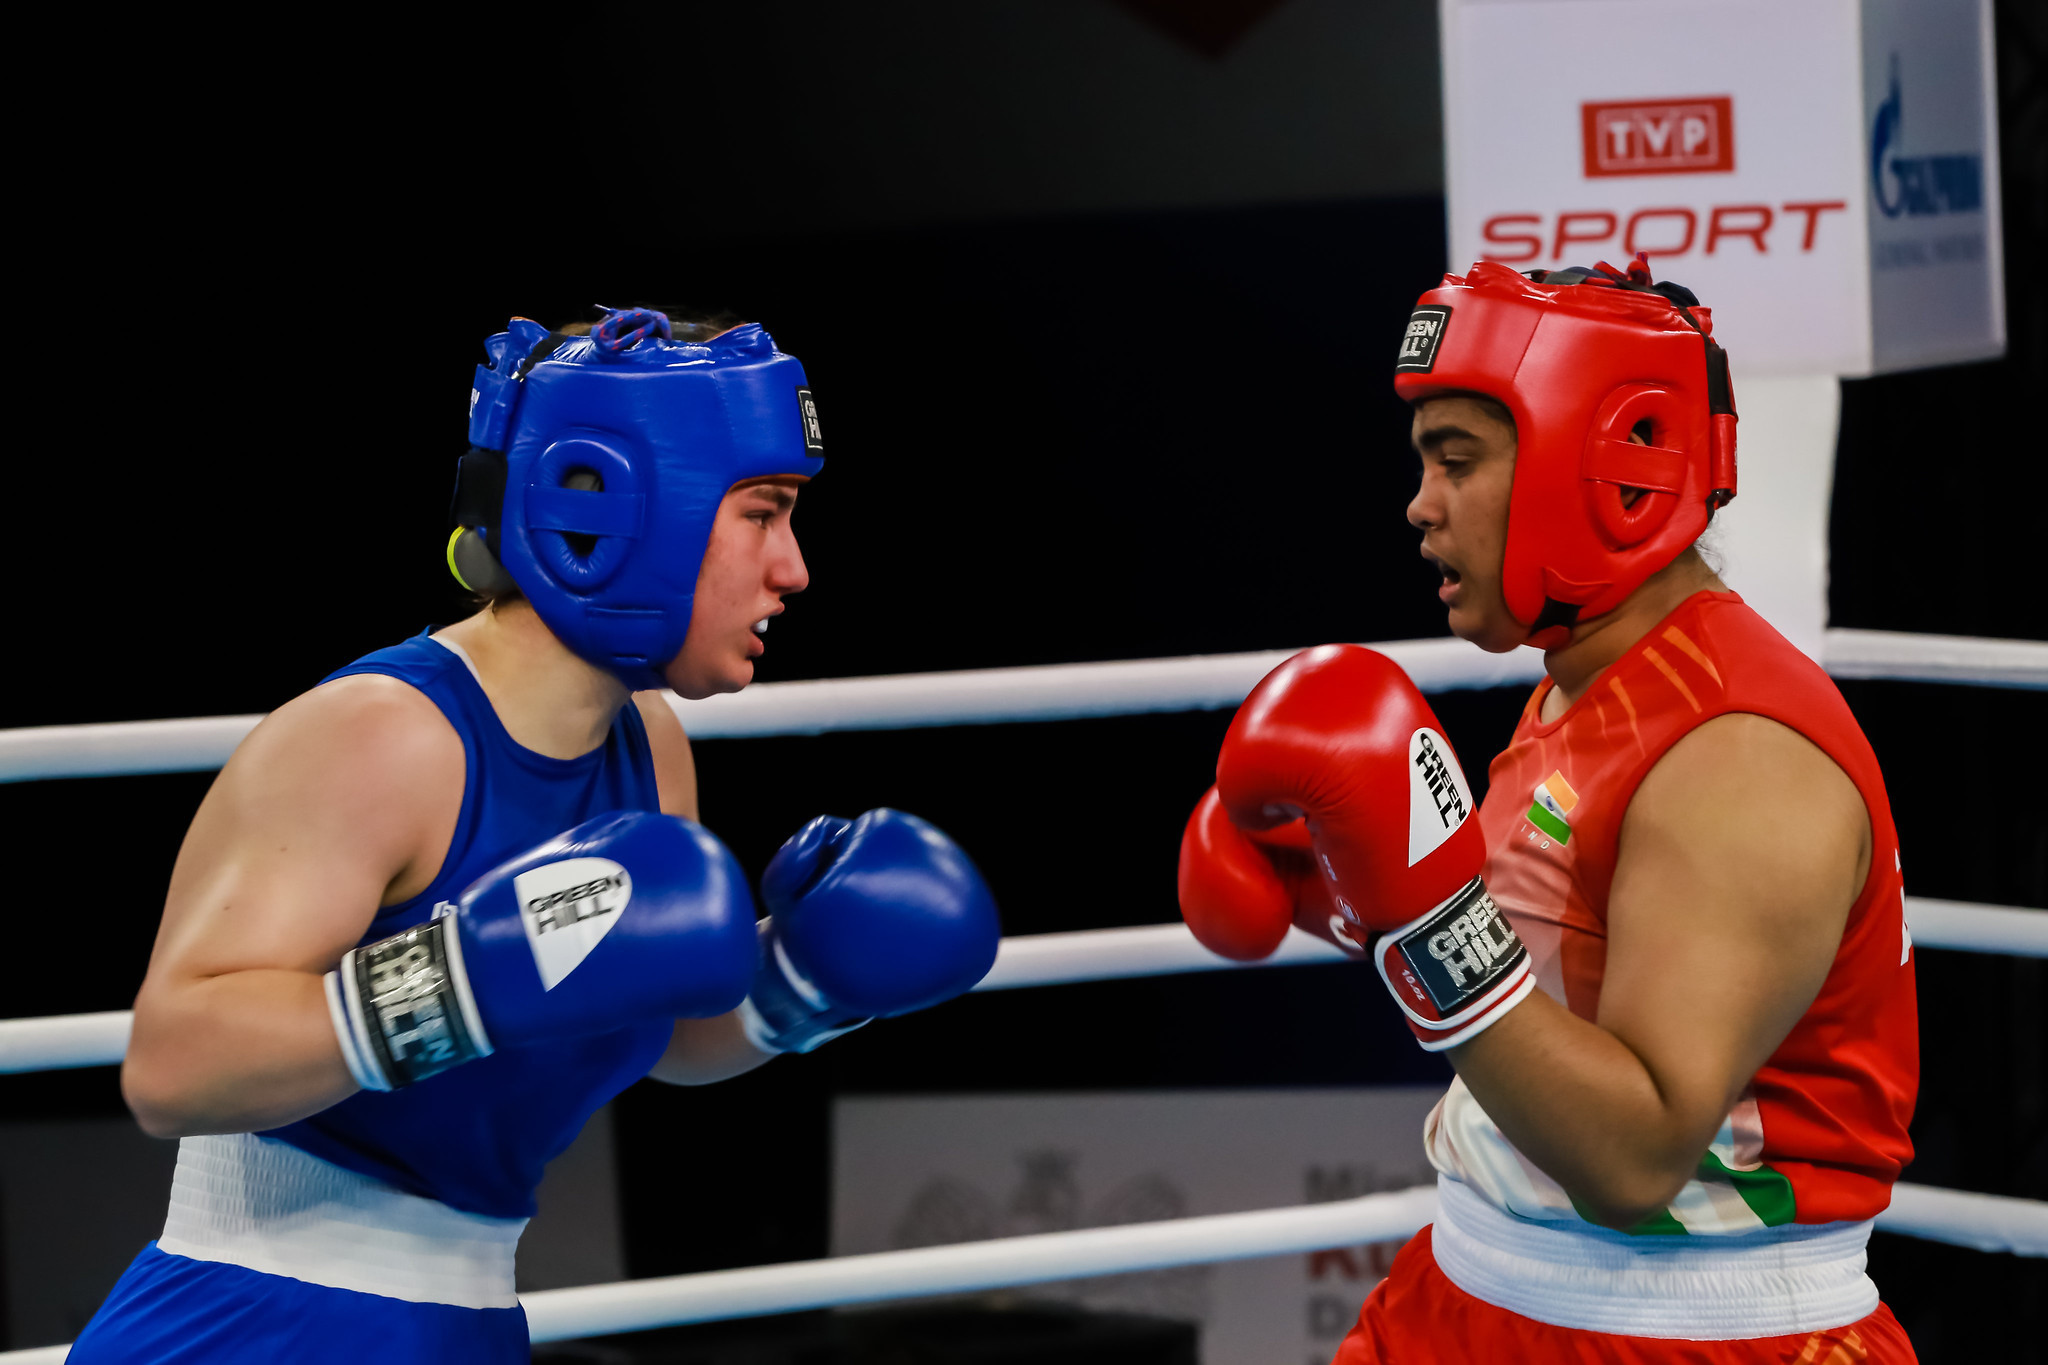 Alfiya Tarannum Akram Khan Pathan, in red, was another, beating home fighter Oliwia Toborek on three of the five judges' scorecards to earn a place in the women's heavyweight gold-medal match ©AIBA